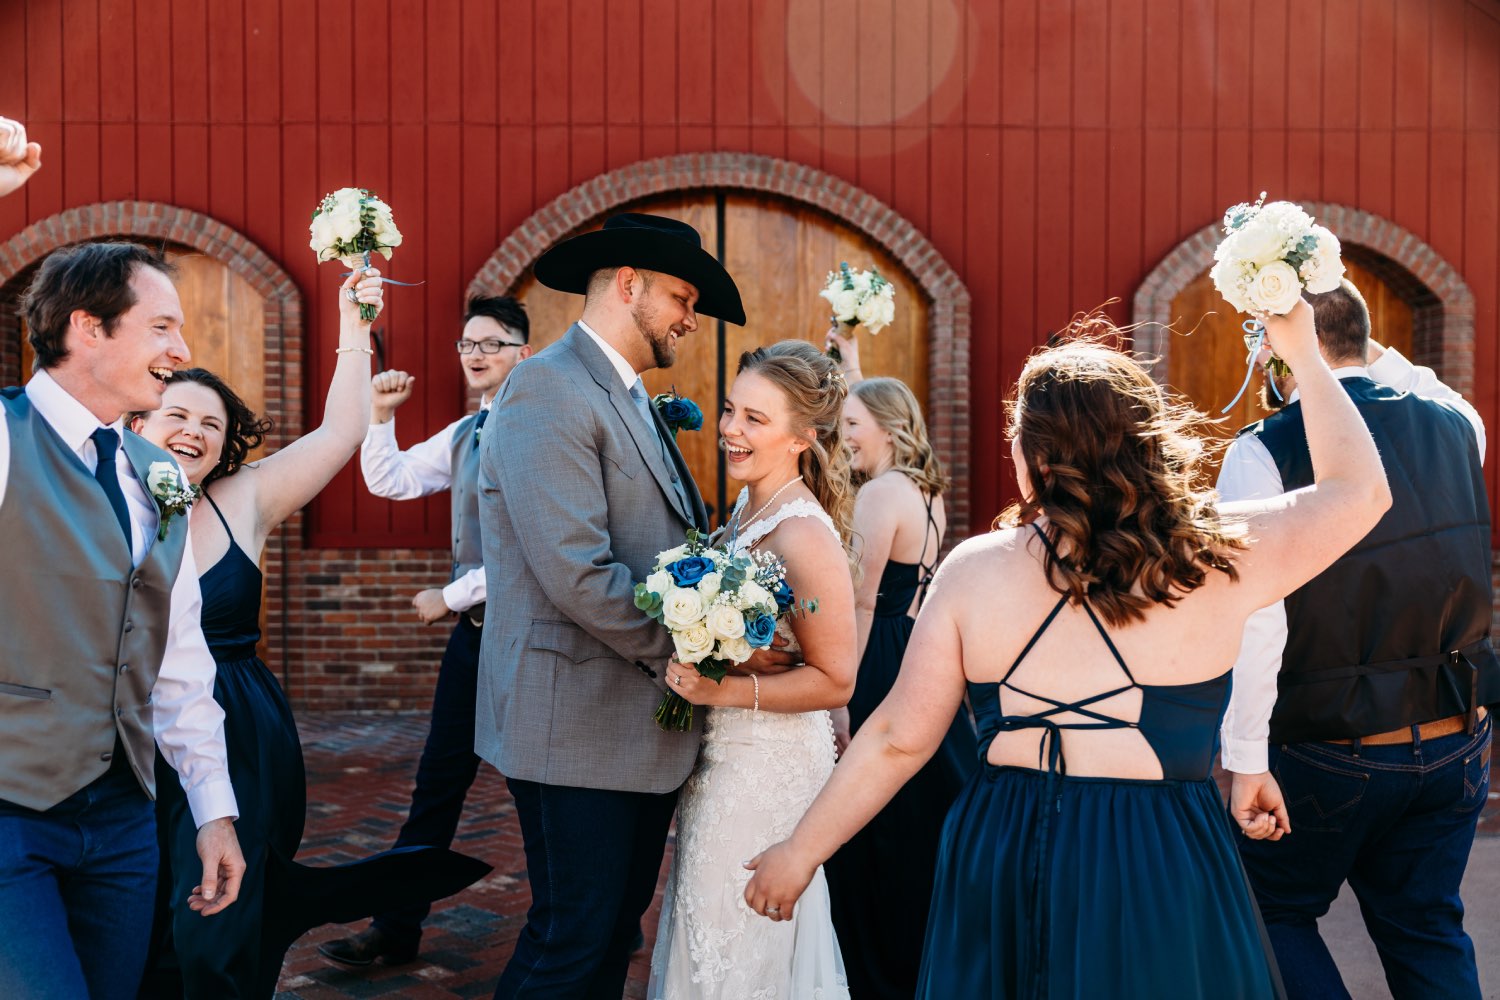 Travis and Bree's country wedding at Crooked Willow Farms in Larkspur, CO